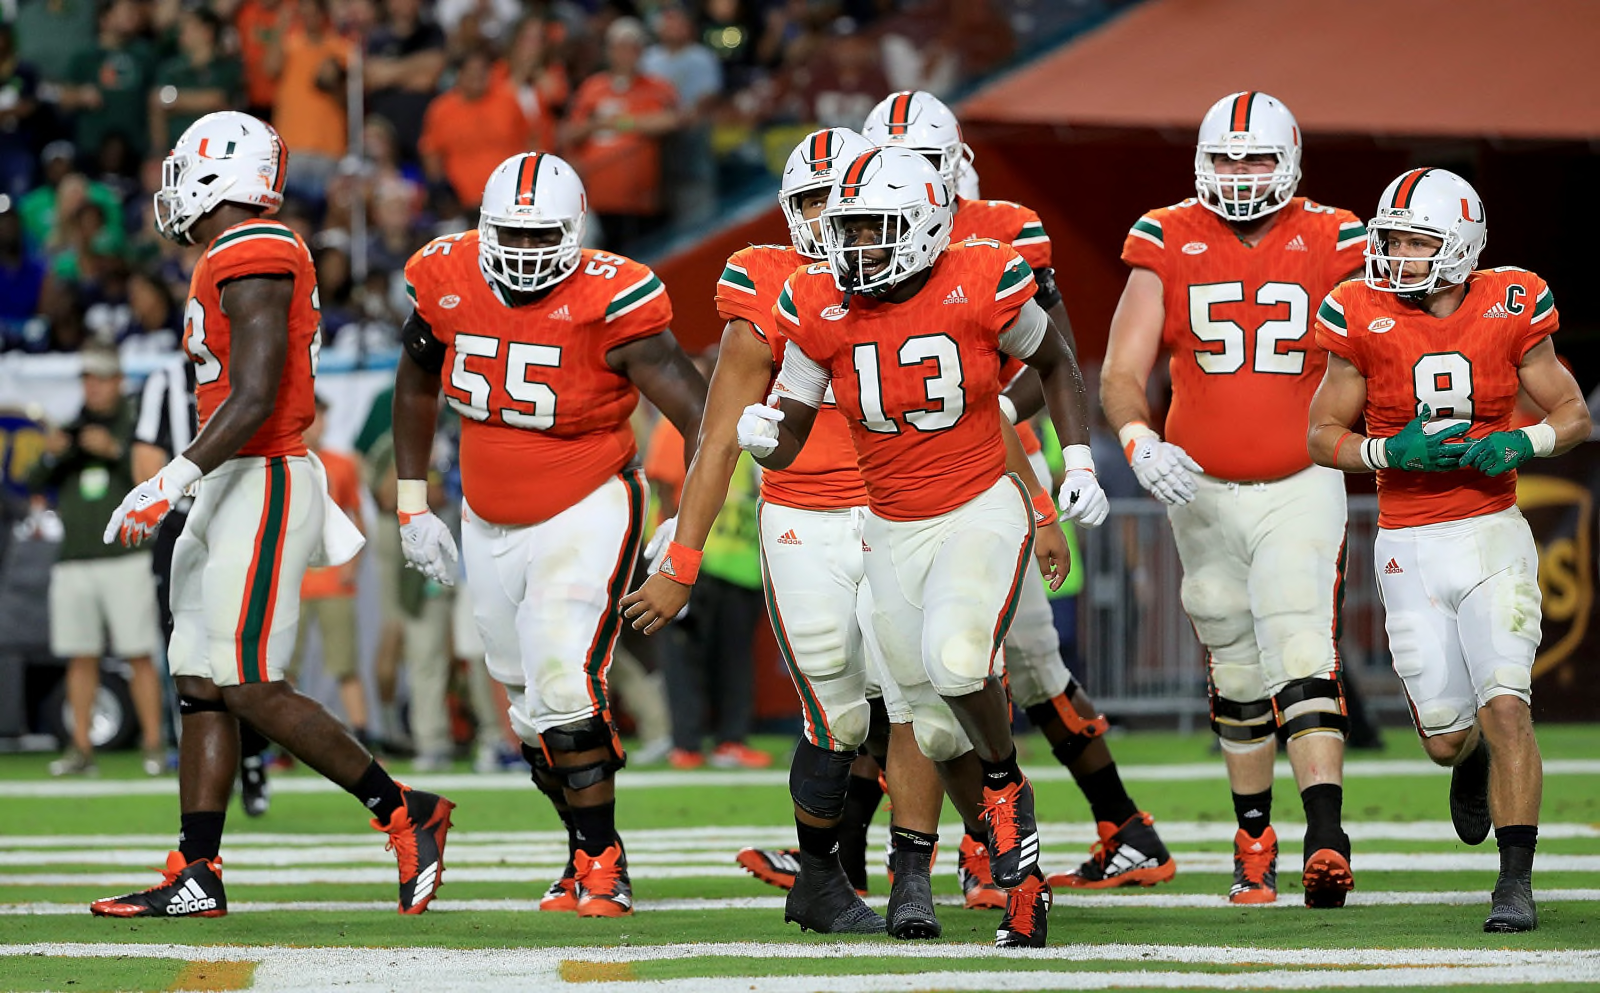 Miami Football: 2018 Hurricanes two-deep depth chart projection - Page 5